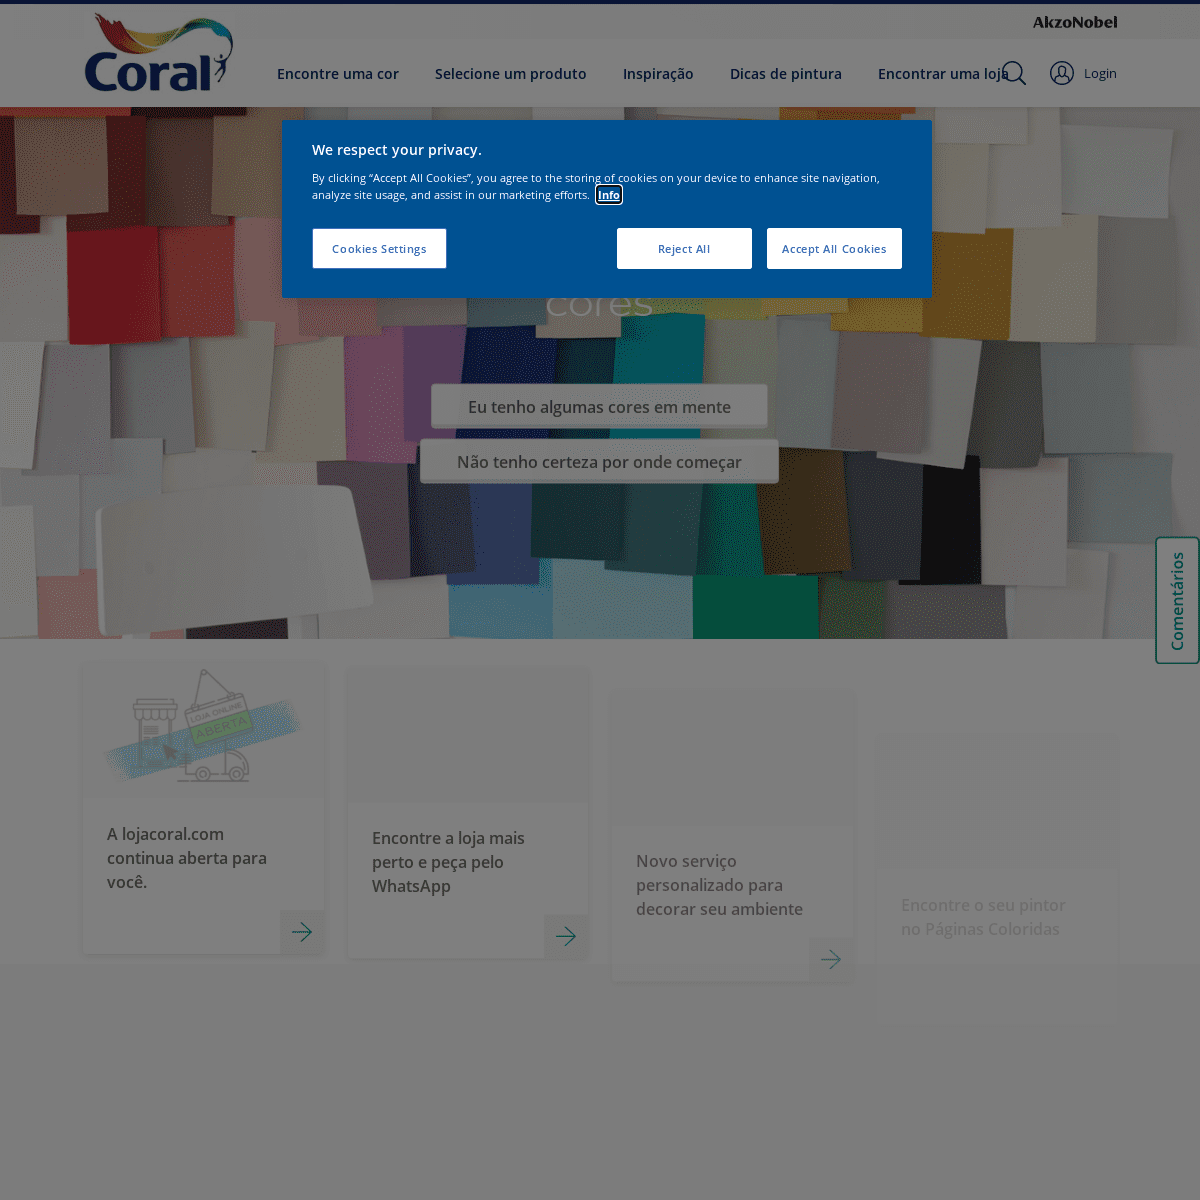 A complete backup of https://coral.com.br